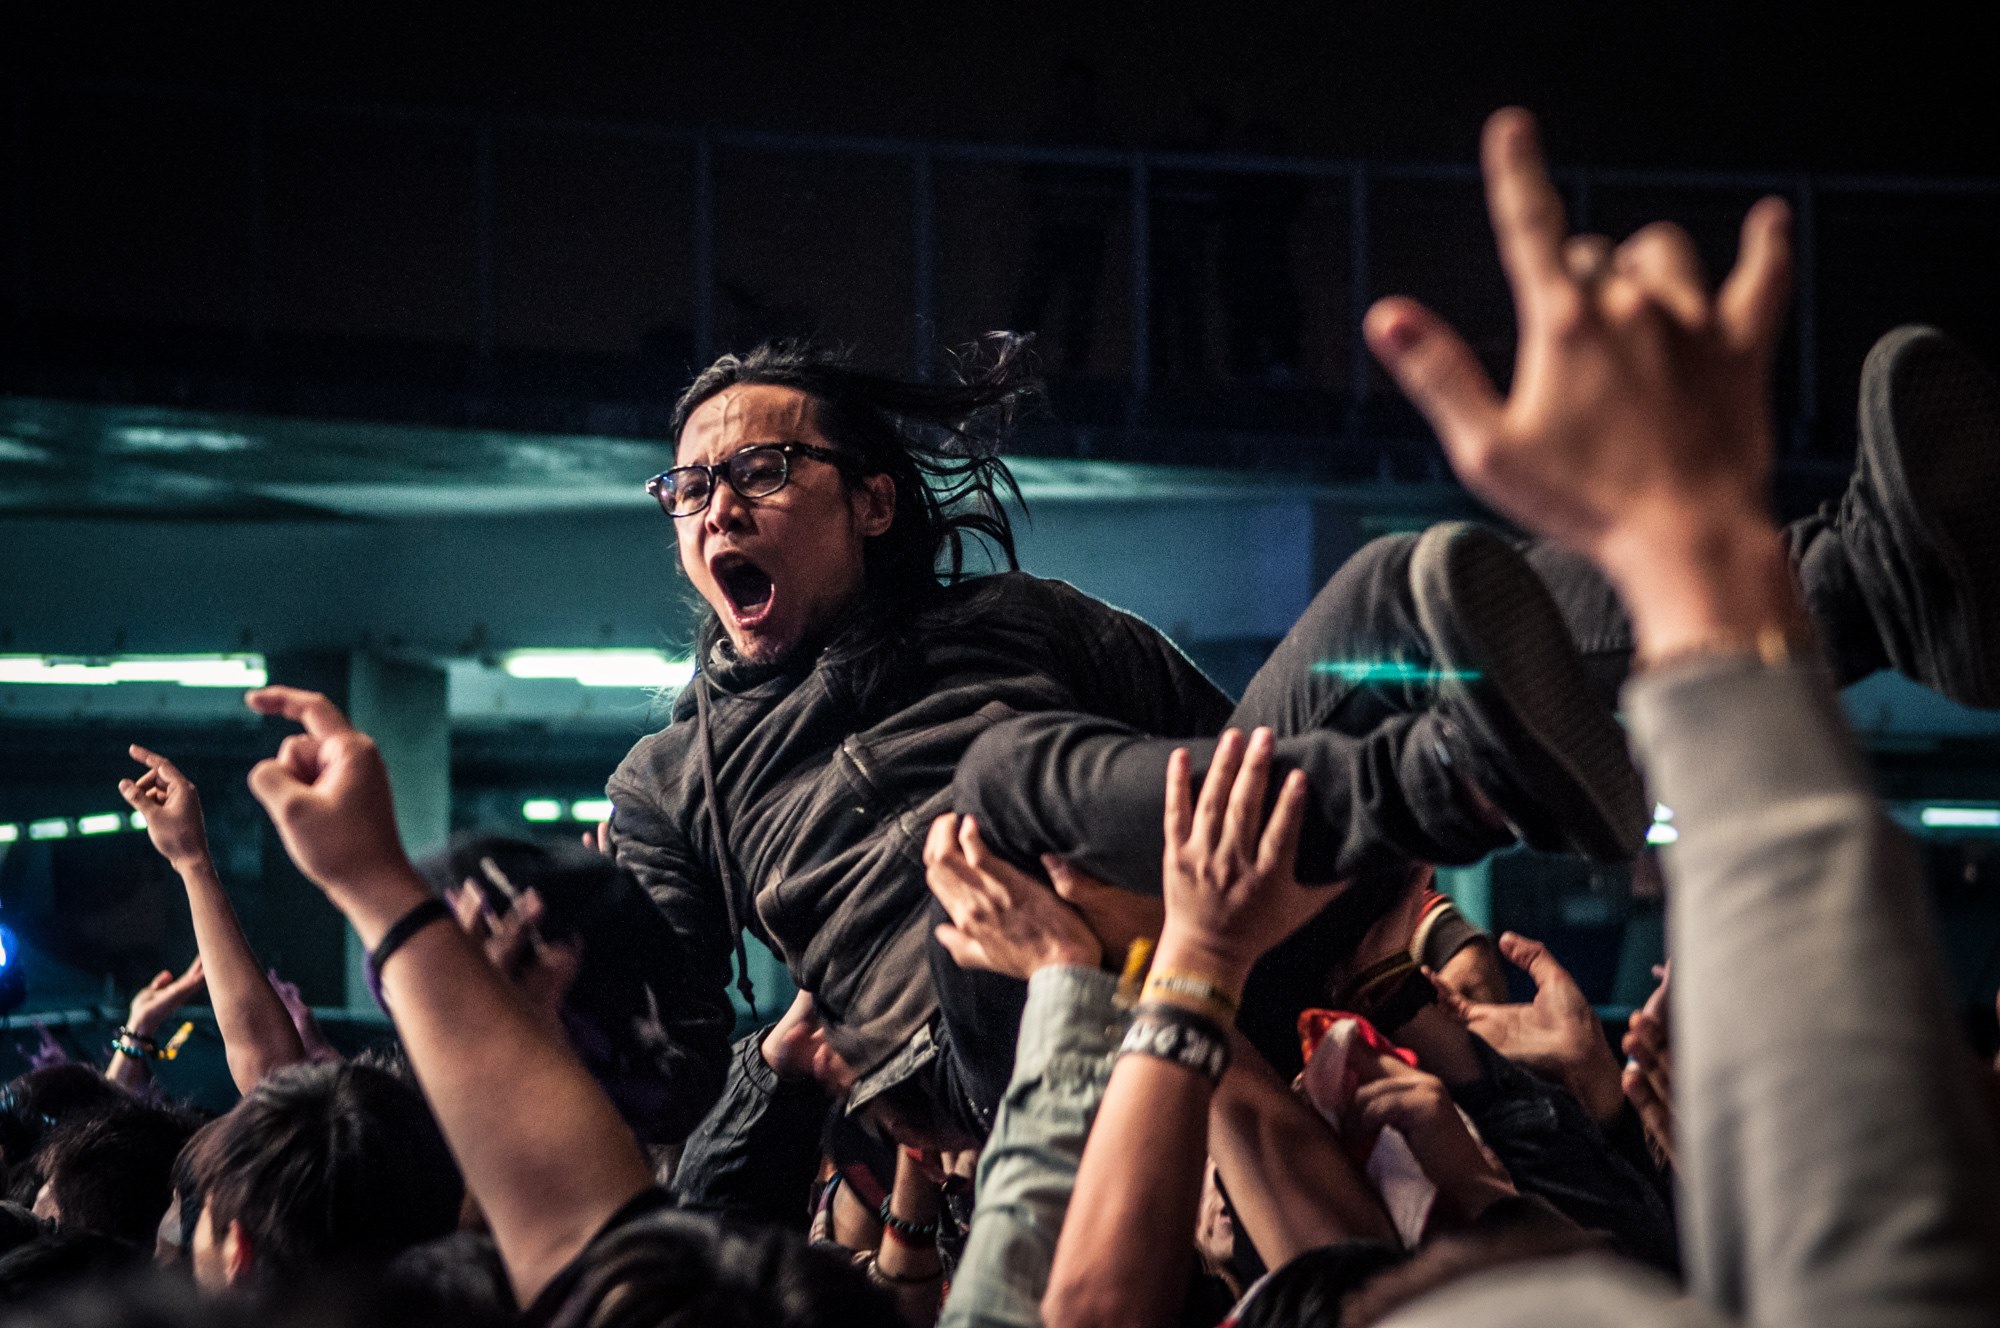 Photo of a Taiwanese music festival attendee crowd-surfing